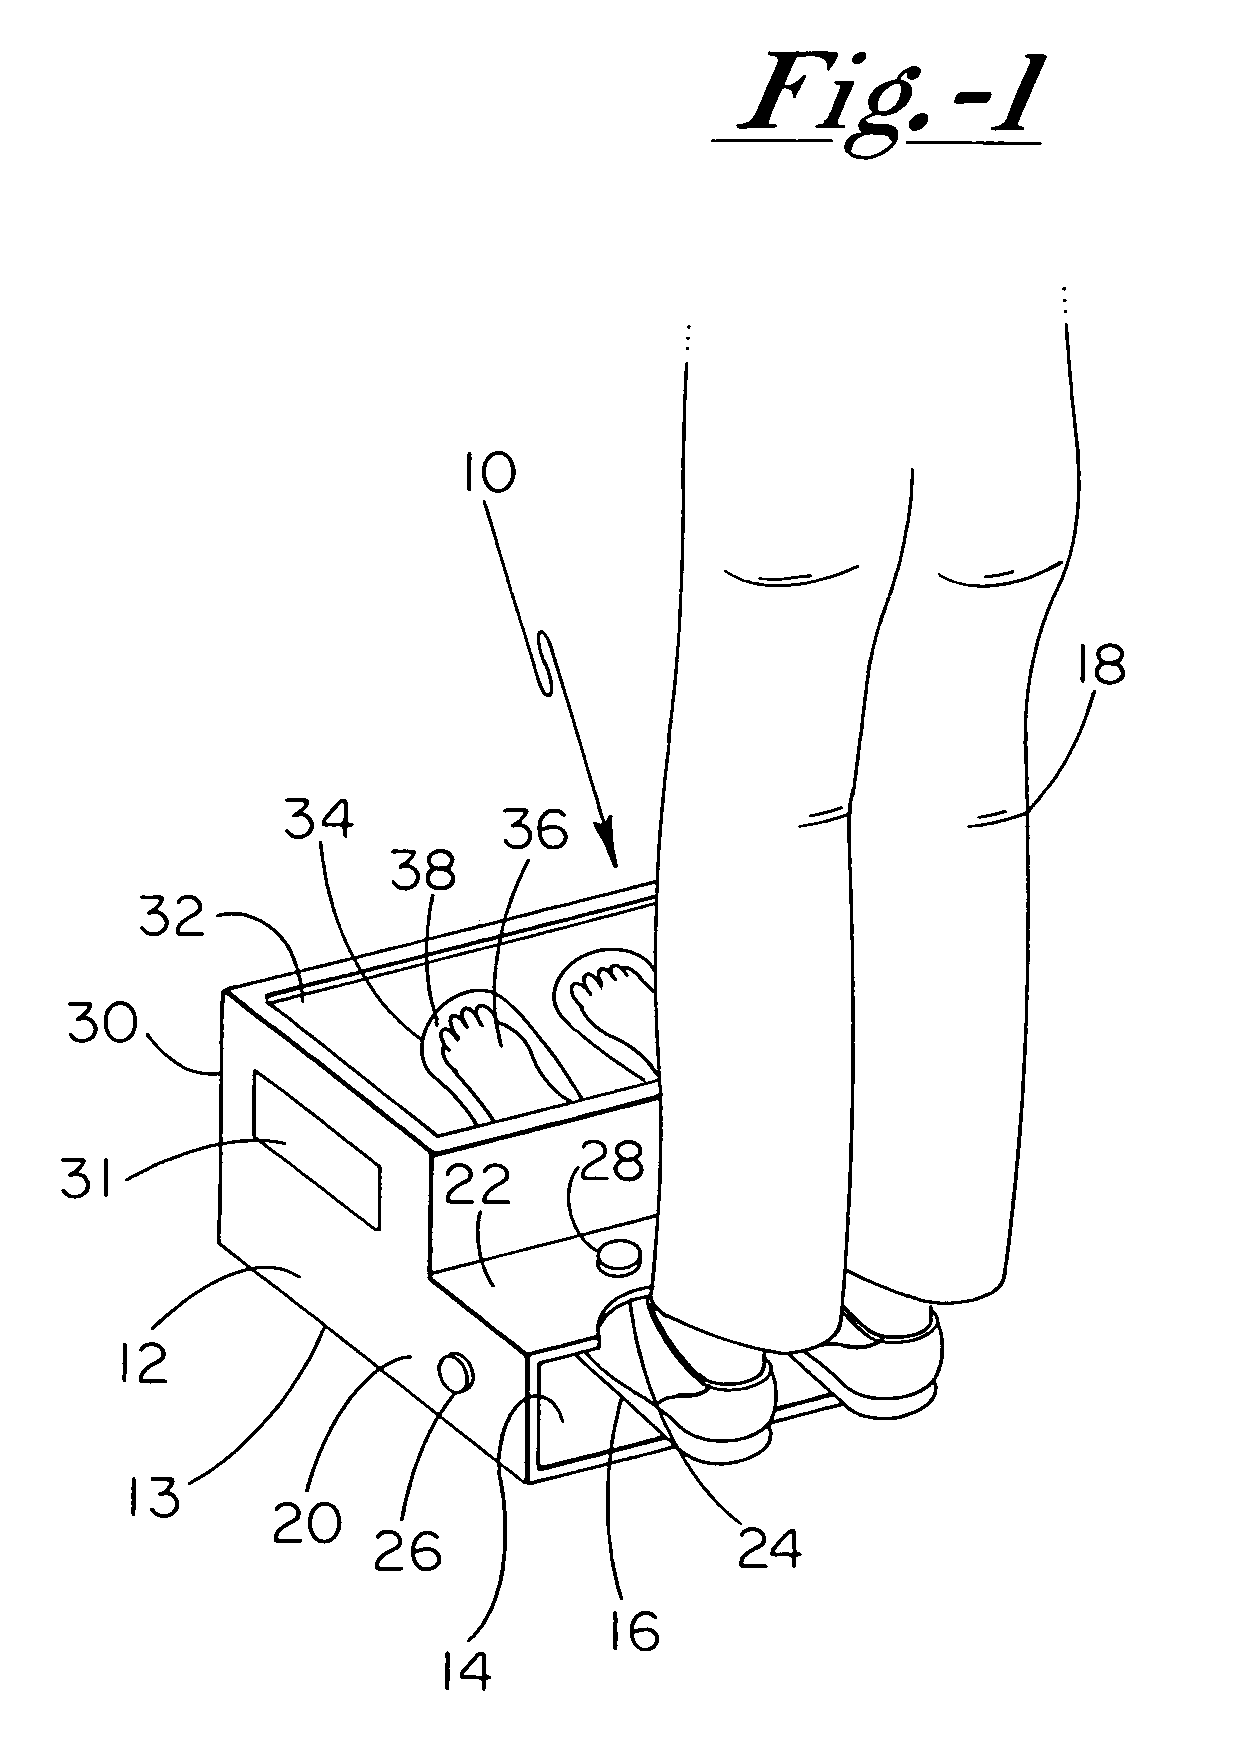 Apparatus and method for "seeing" foot inside of shoe to determine the proper fit of the shoe